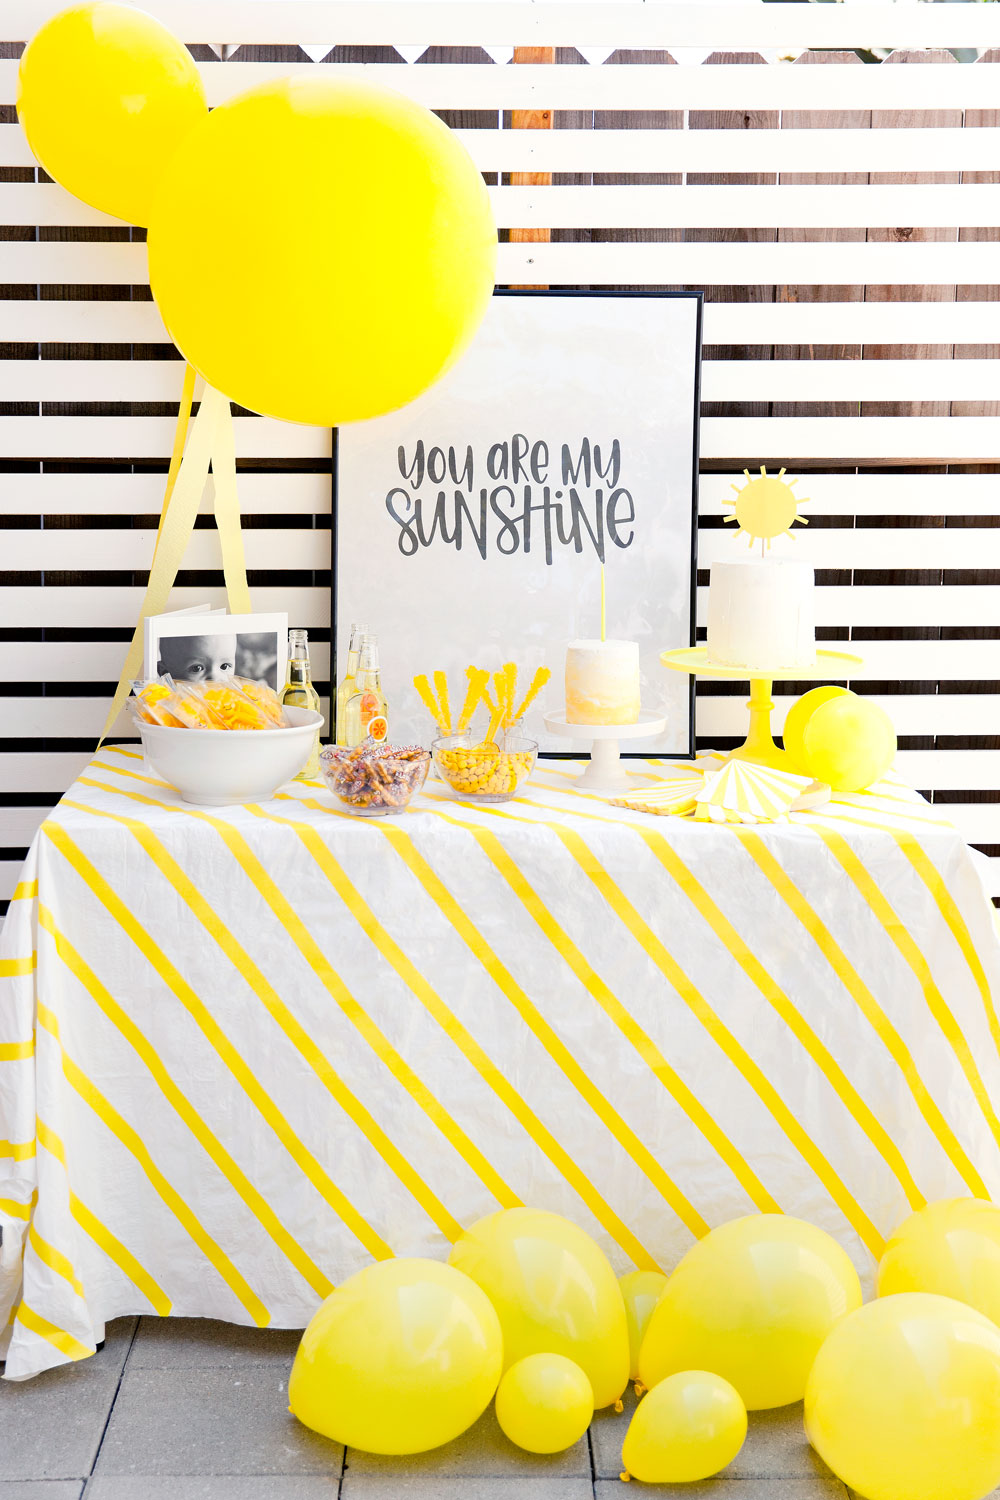 You-are-my-sunshine-1st-birthday-party-theme